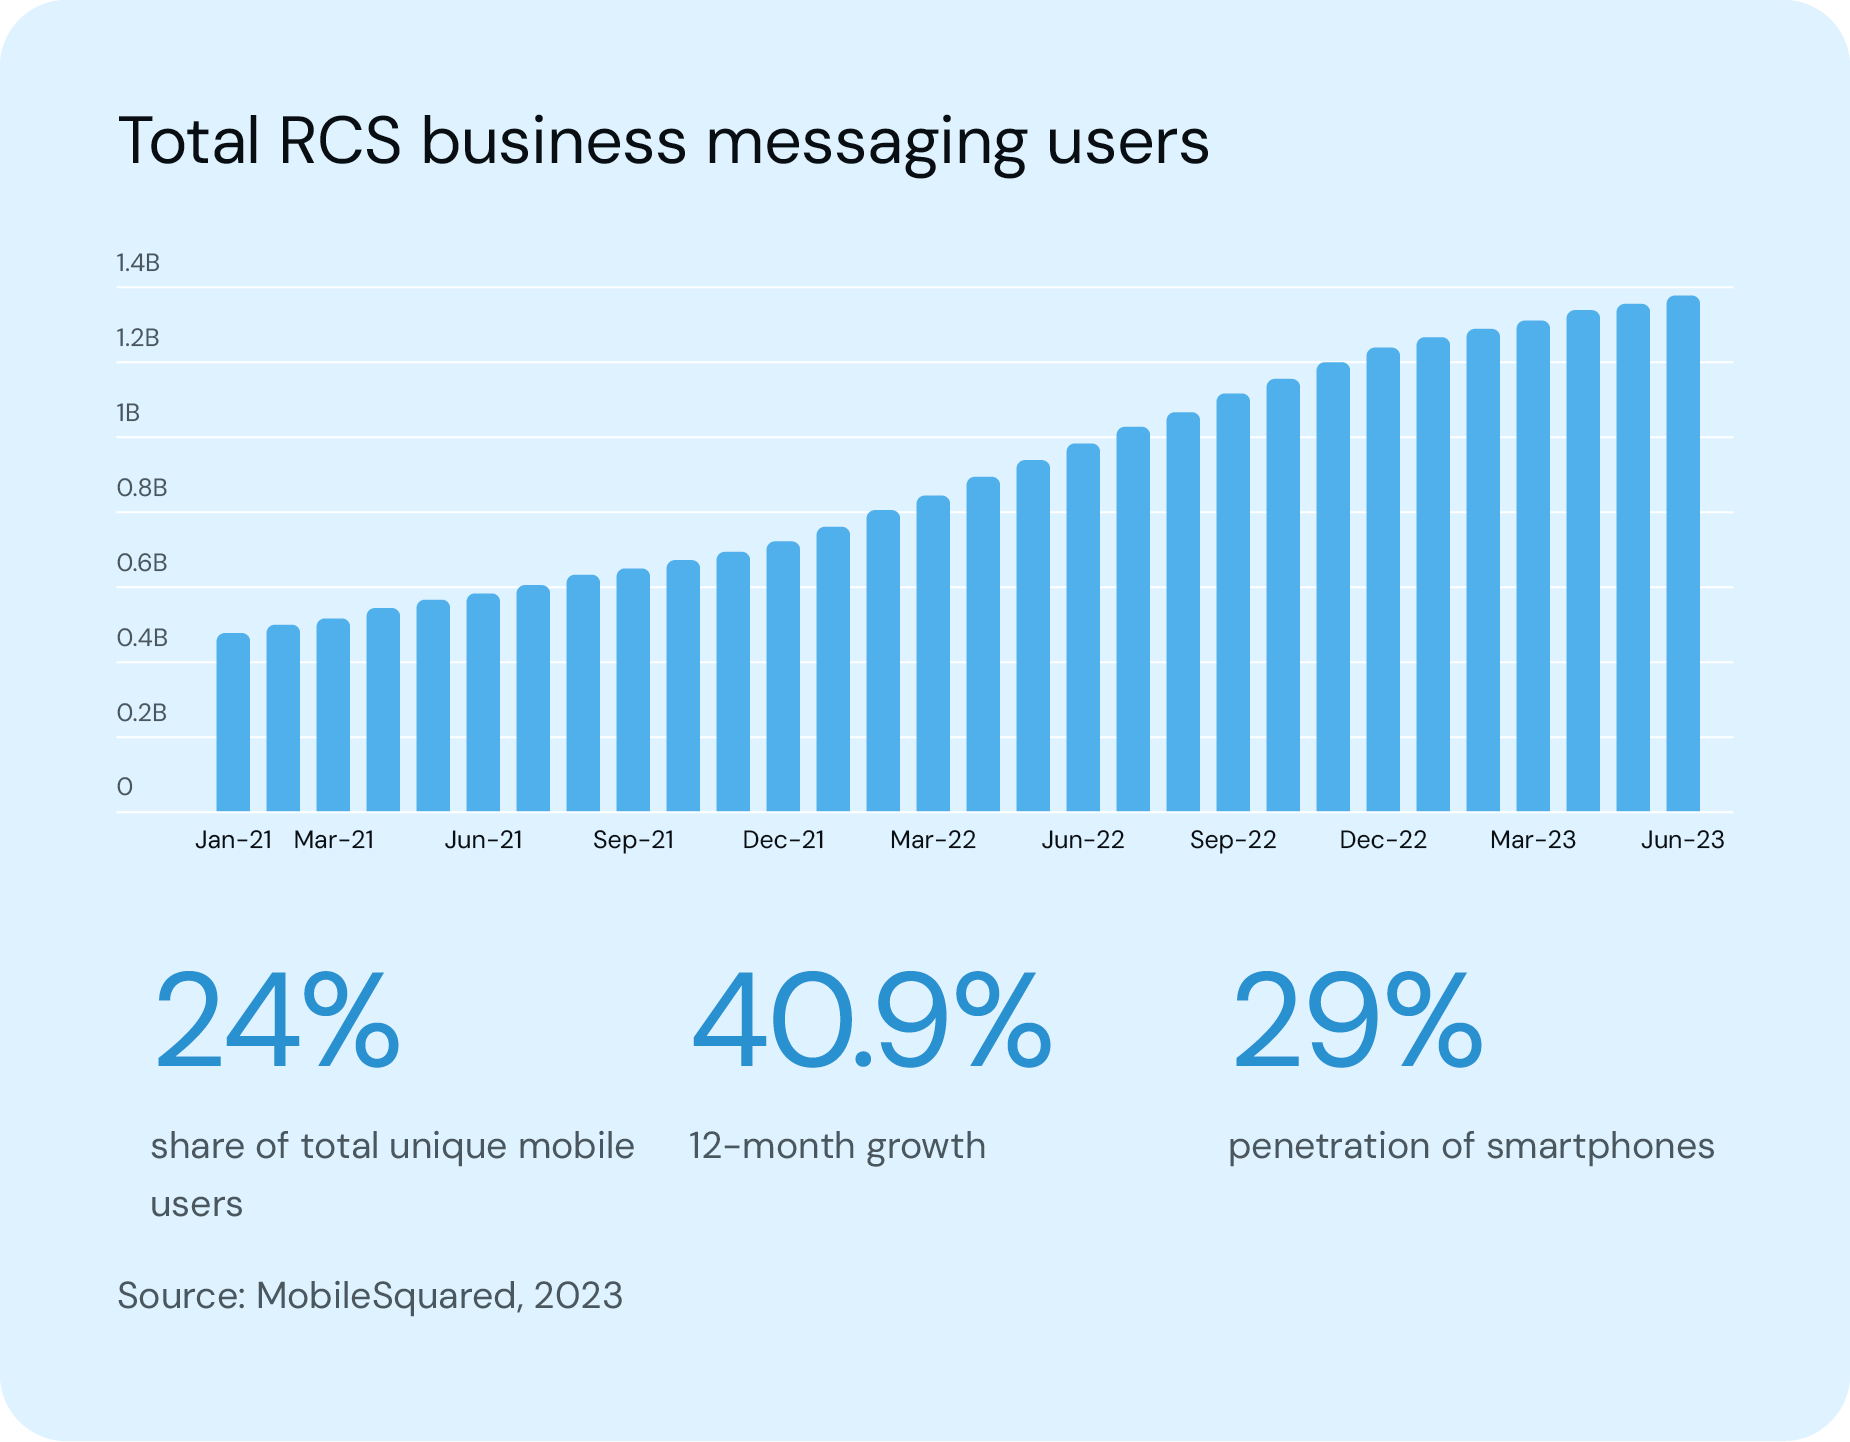 RCS statistic of business messaging adoption from Mobilesquared in 2023